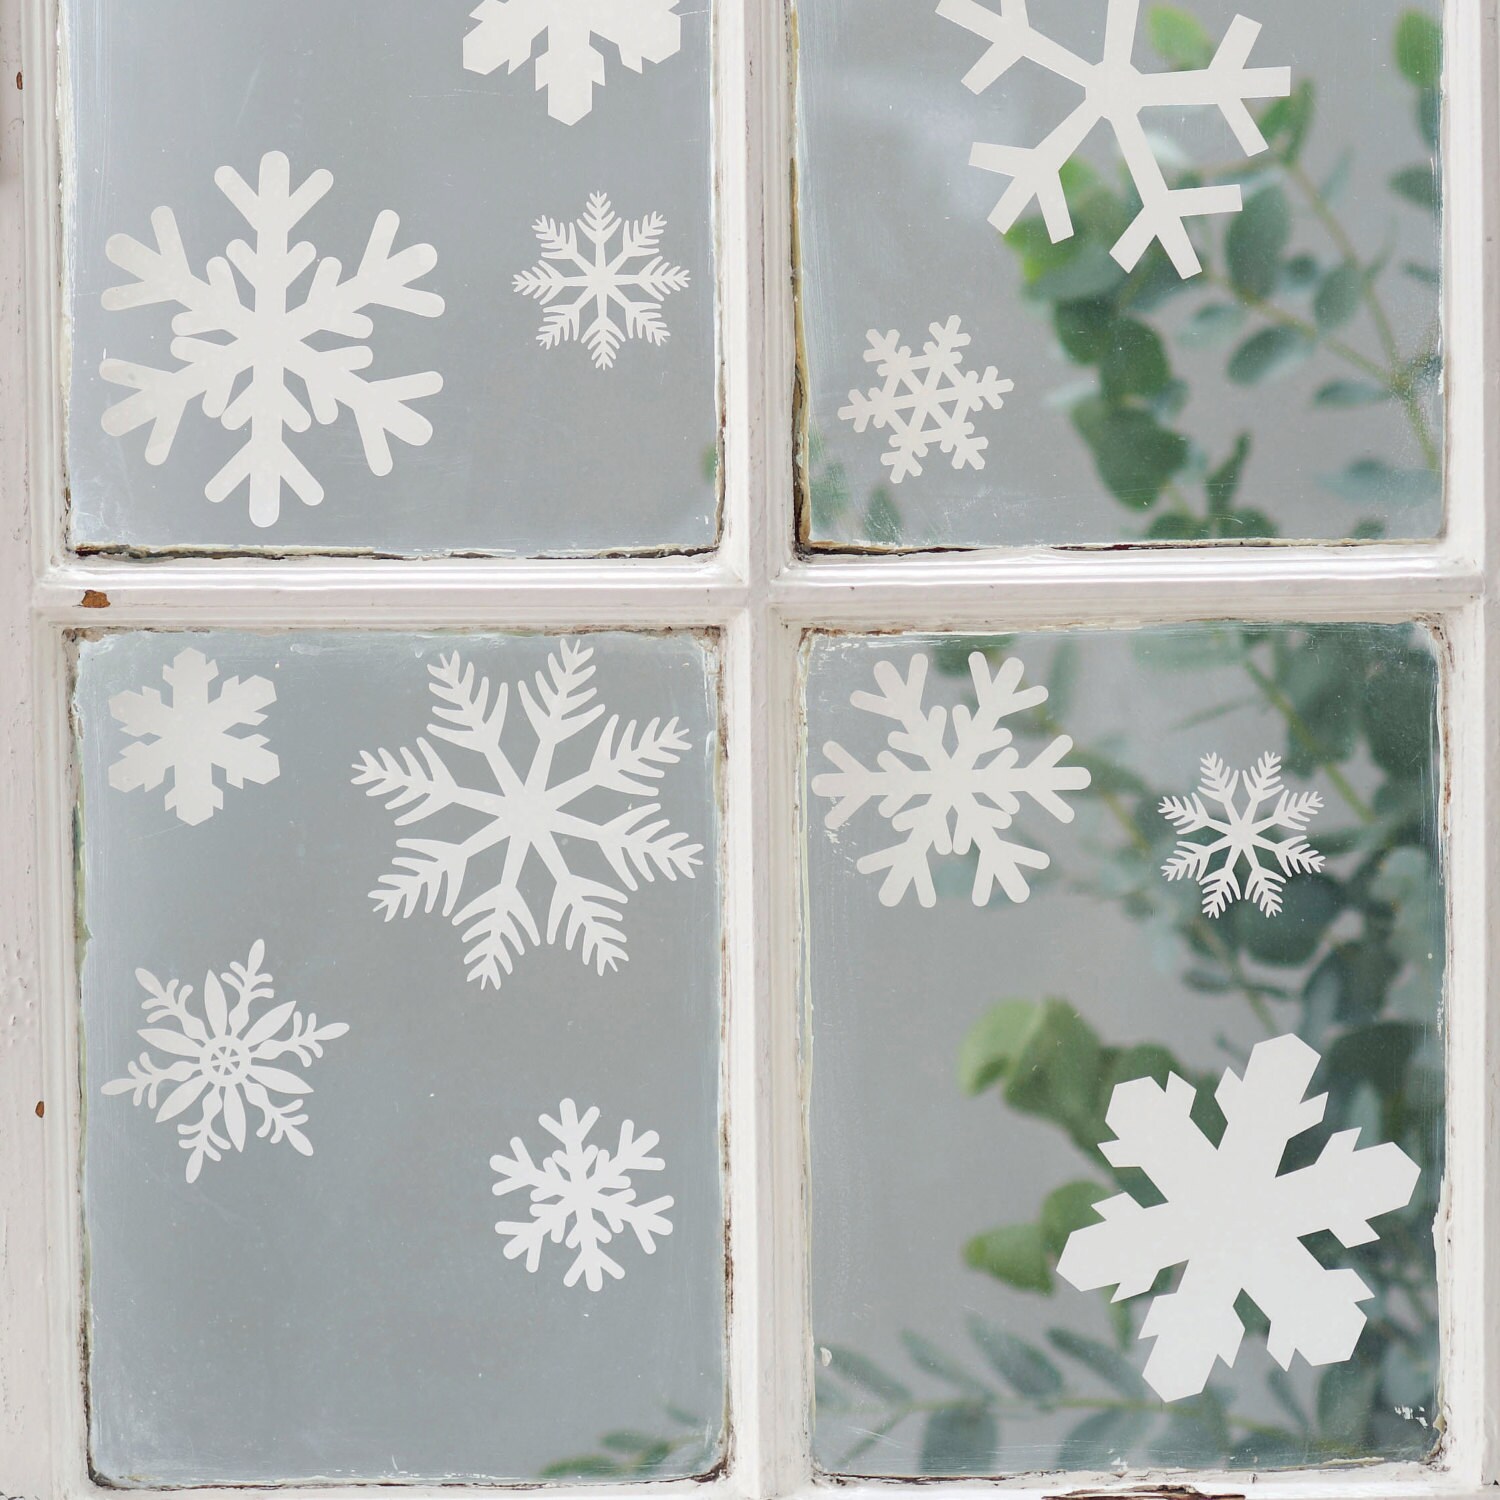 Giftwrapping Cardmaking 20 x Snowflake stickers Christmas Wall & Window Decor 